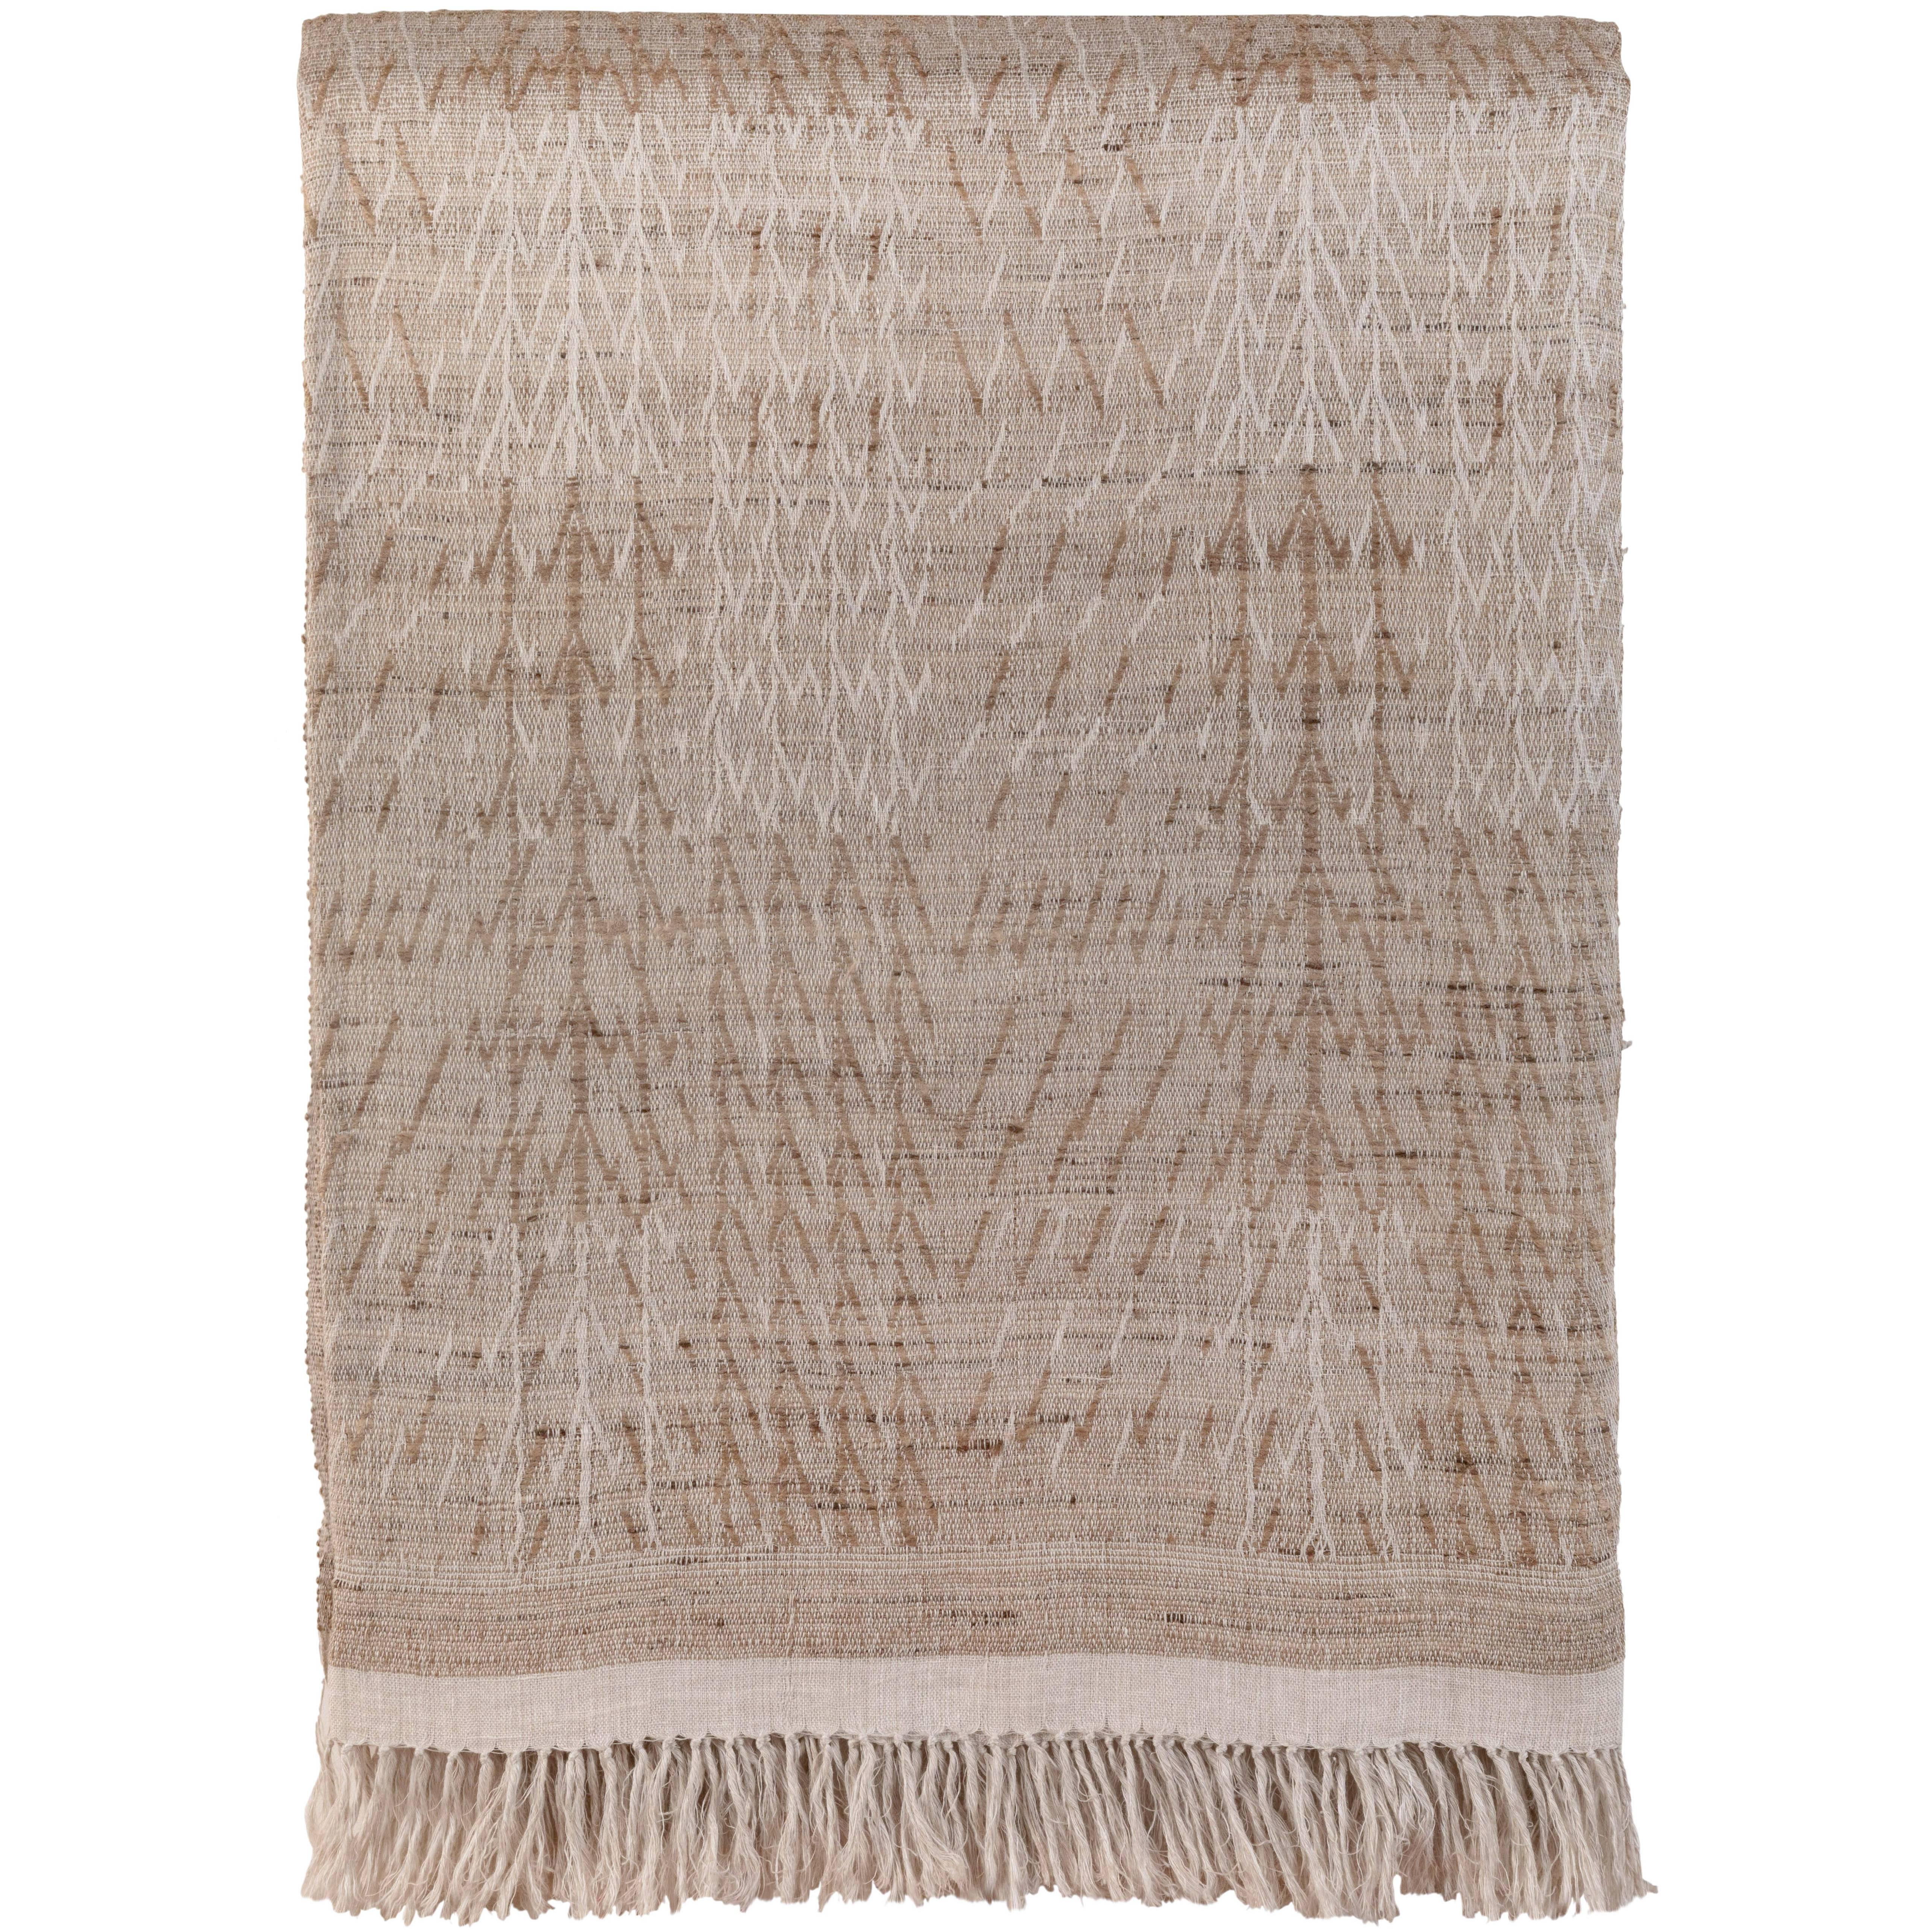 Indian Handwoven Raw Silk and Linen Bedcover, Beige Neutrals For Sale